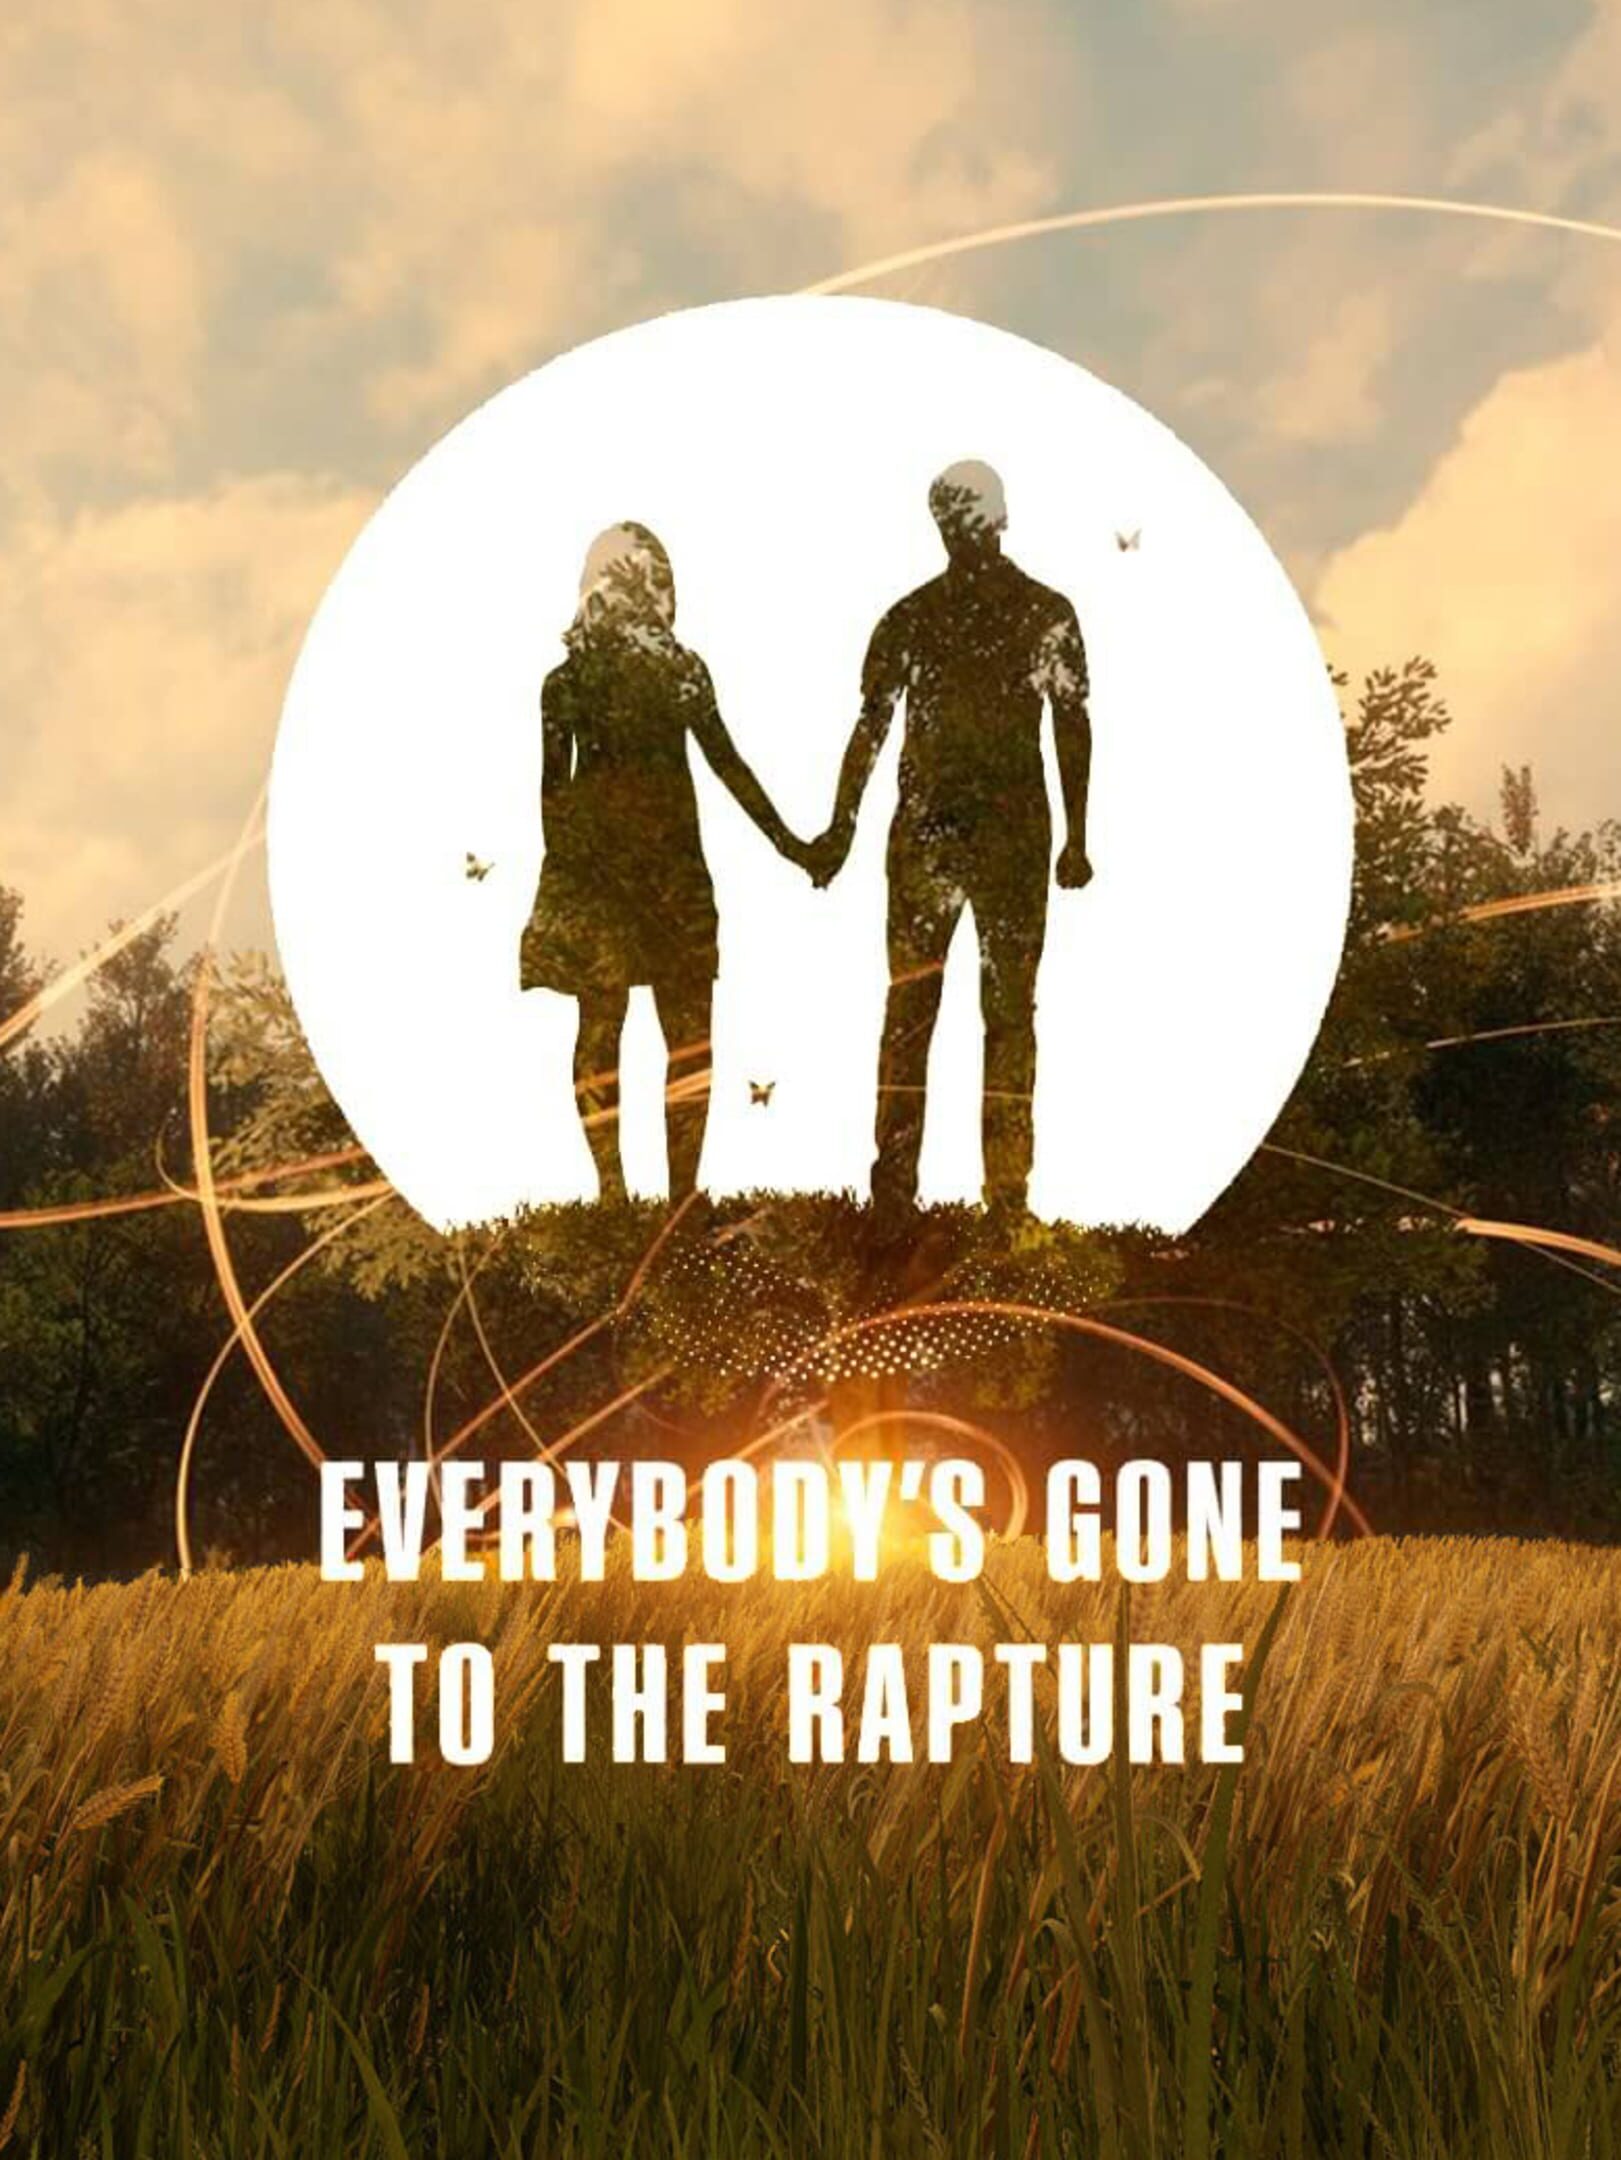 Everybody s world. Everybody's gone to the Rapture (2015). Everybody going to the Rapture. Everybody’s gone to the Rapture хроники последних дней. Everybody's gone to the Rapture отзывы.